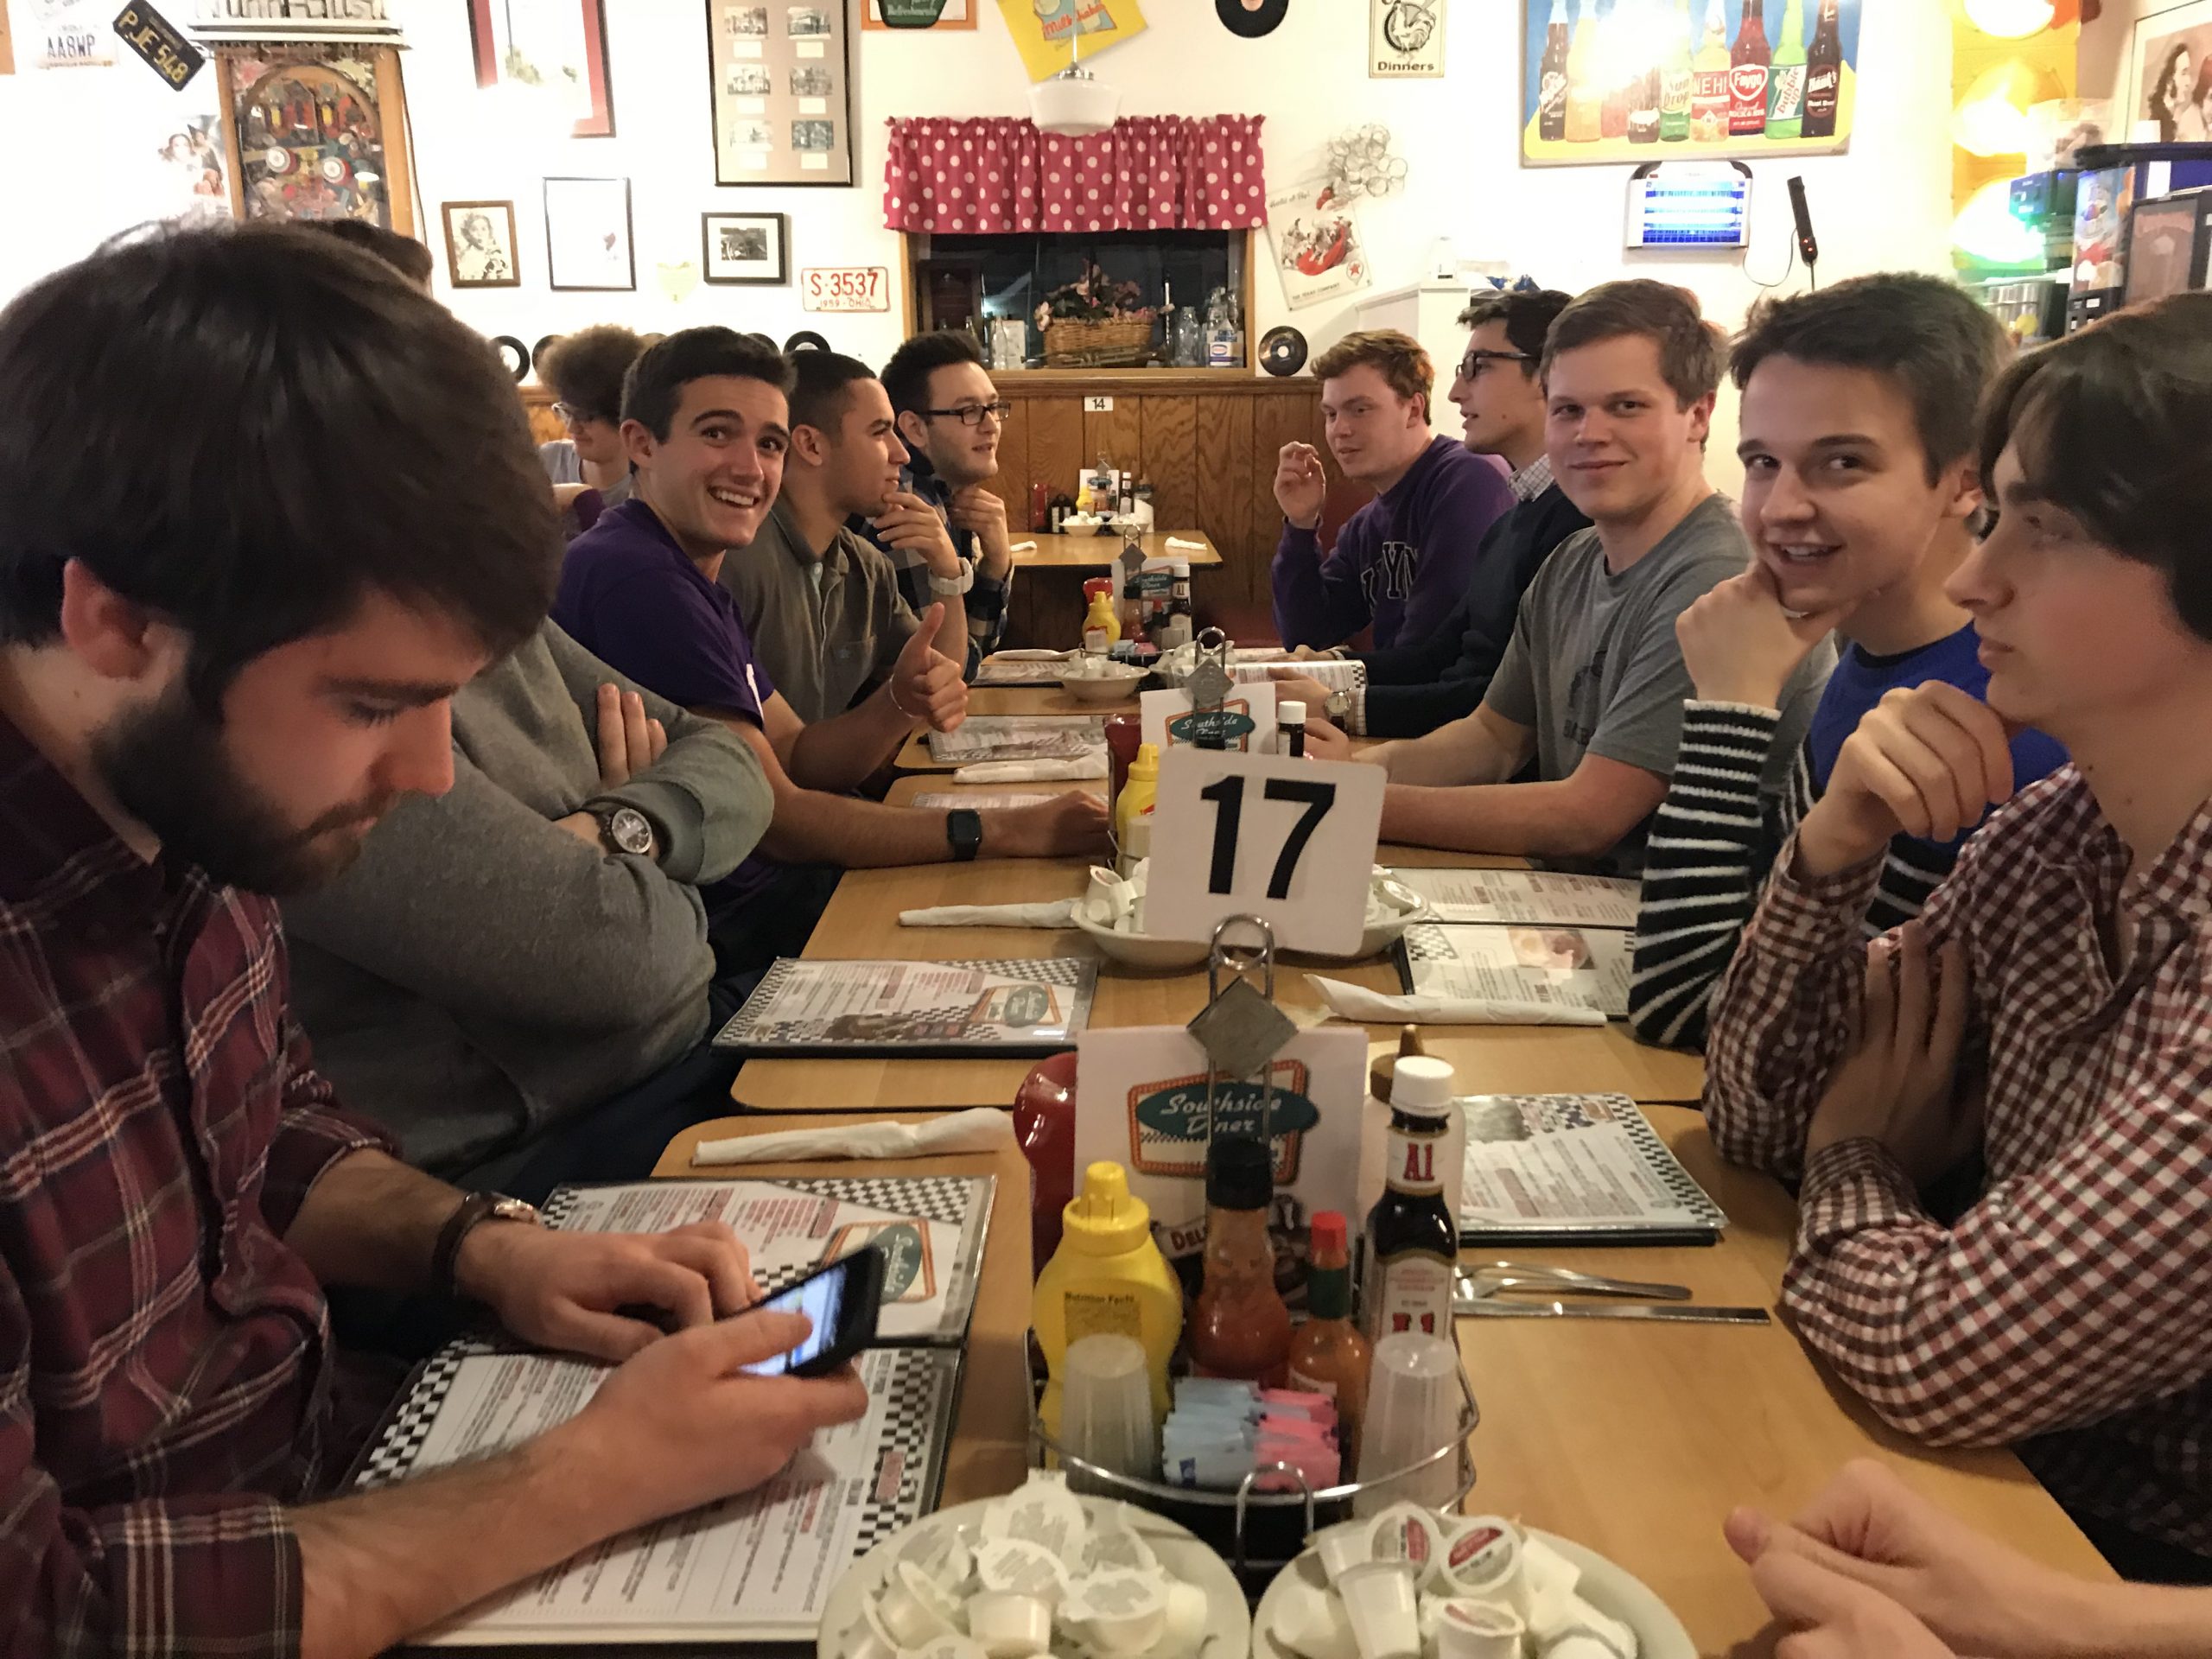 Annual Steak Dinner Caps Busy, Fun-Filled Rush Week For Chi